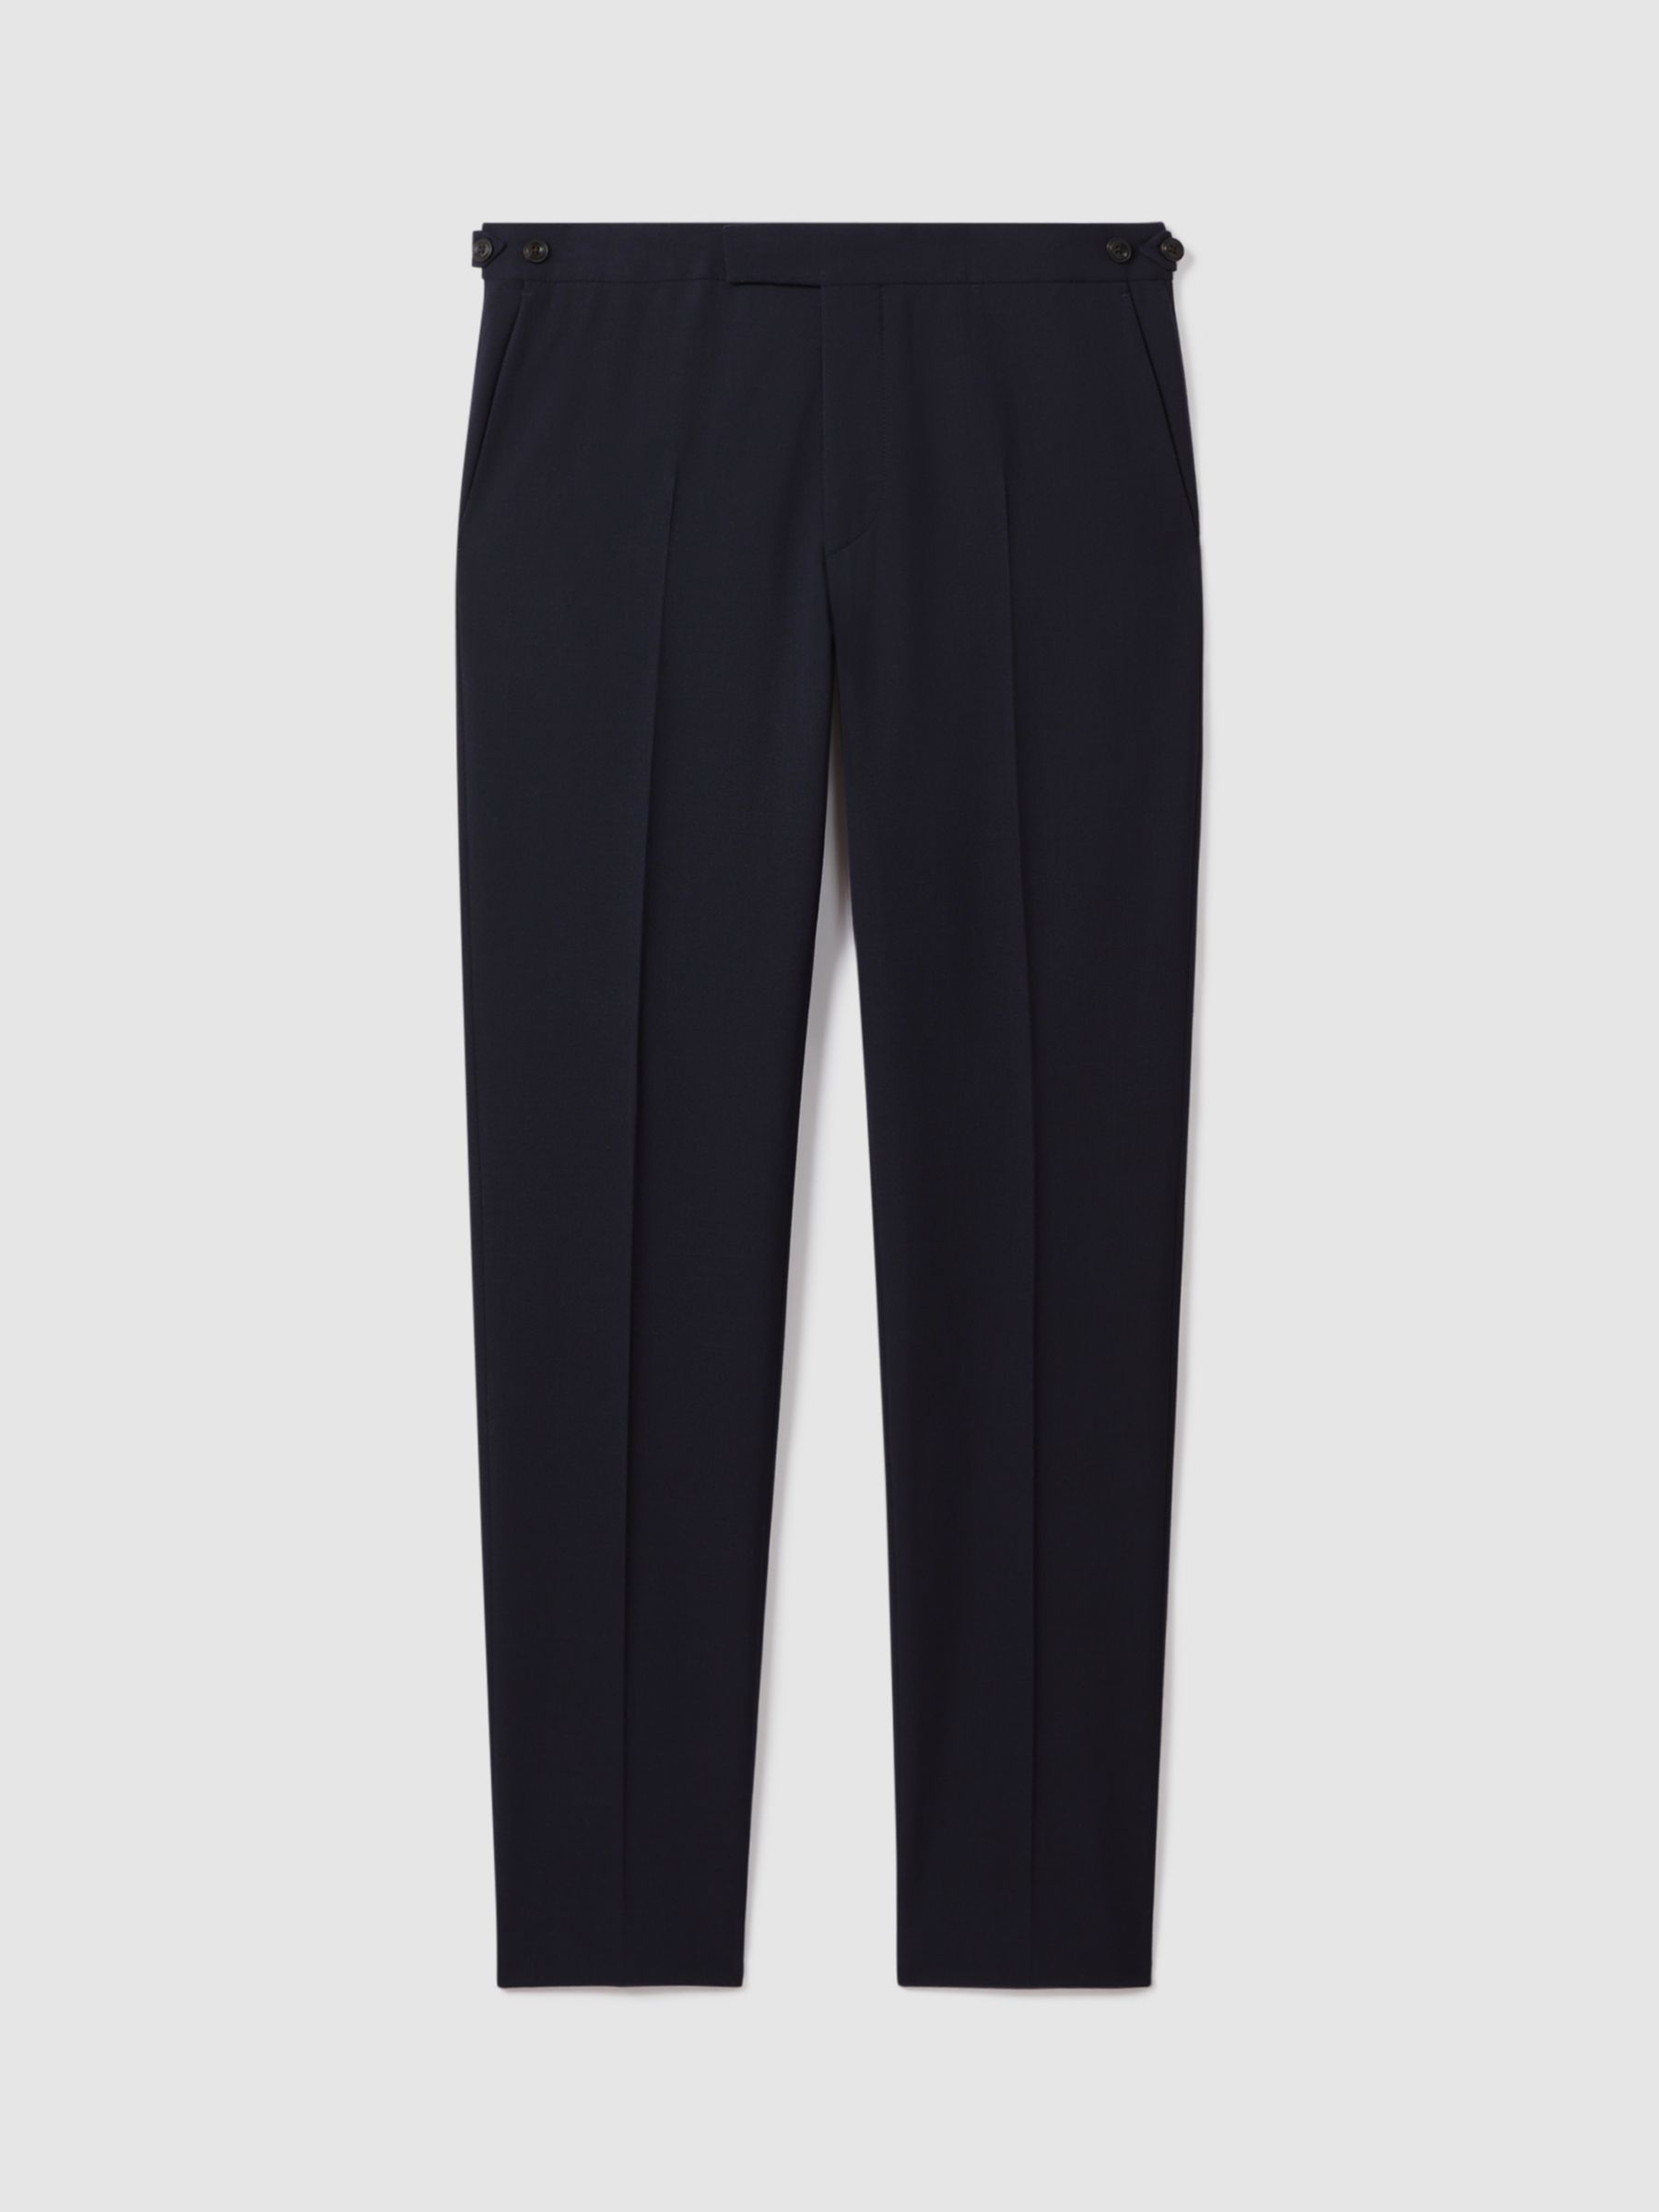 Buy Reiss Belmont Textured Trousers, Navy Online at johnlewis.com